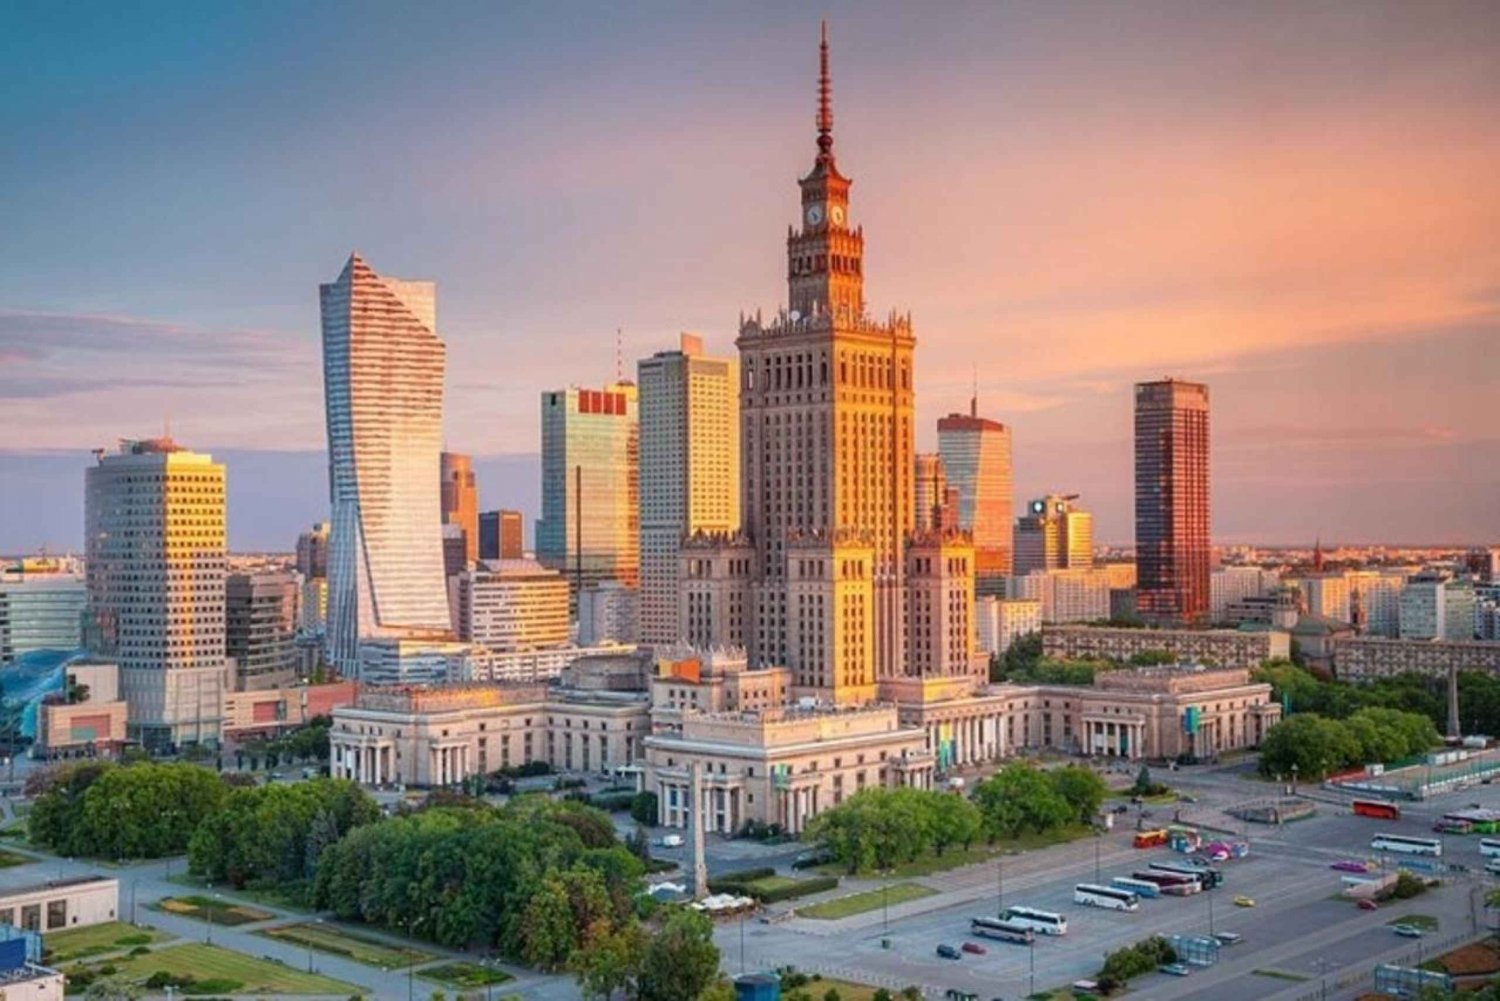 Warsaw : Must-See Walking Tour With A Guide